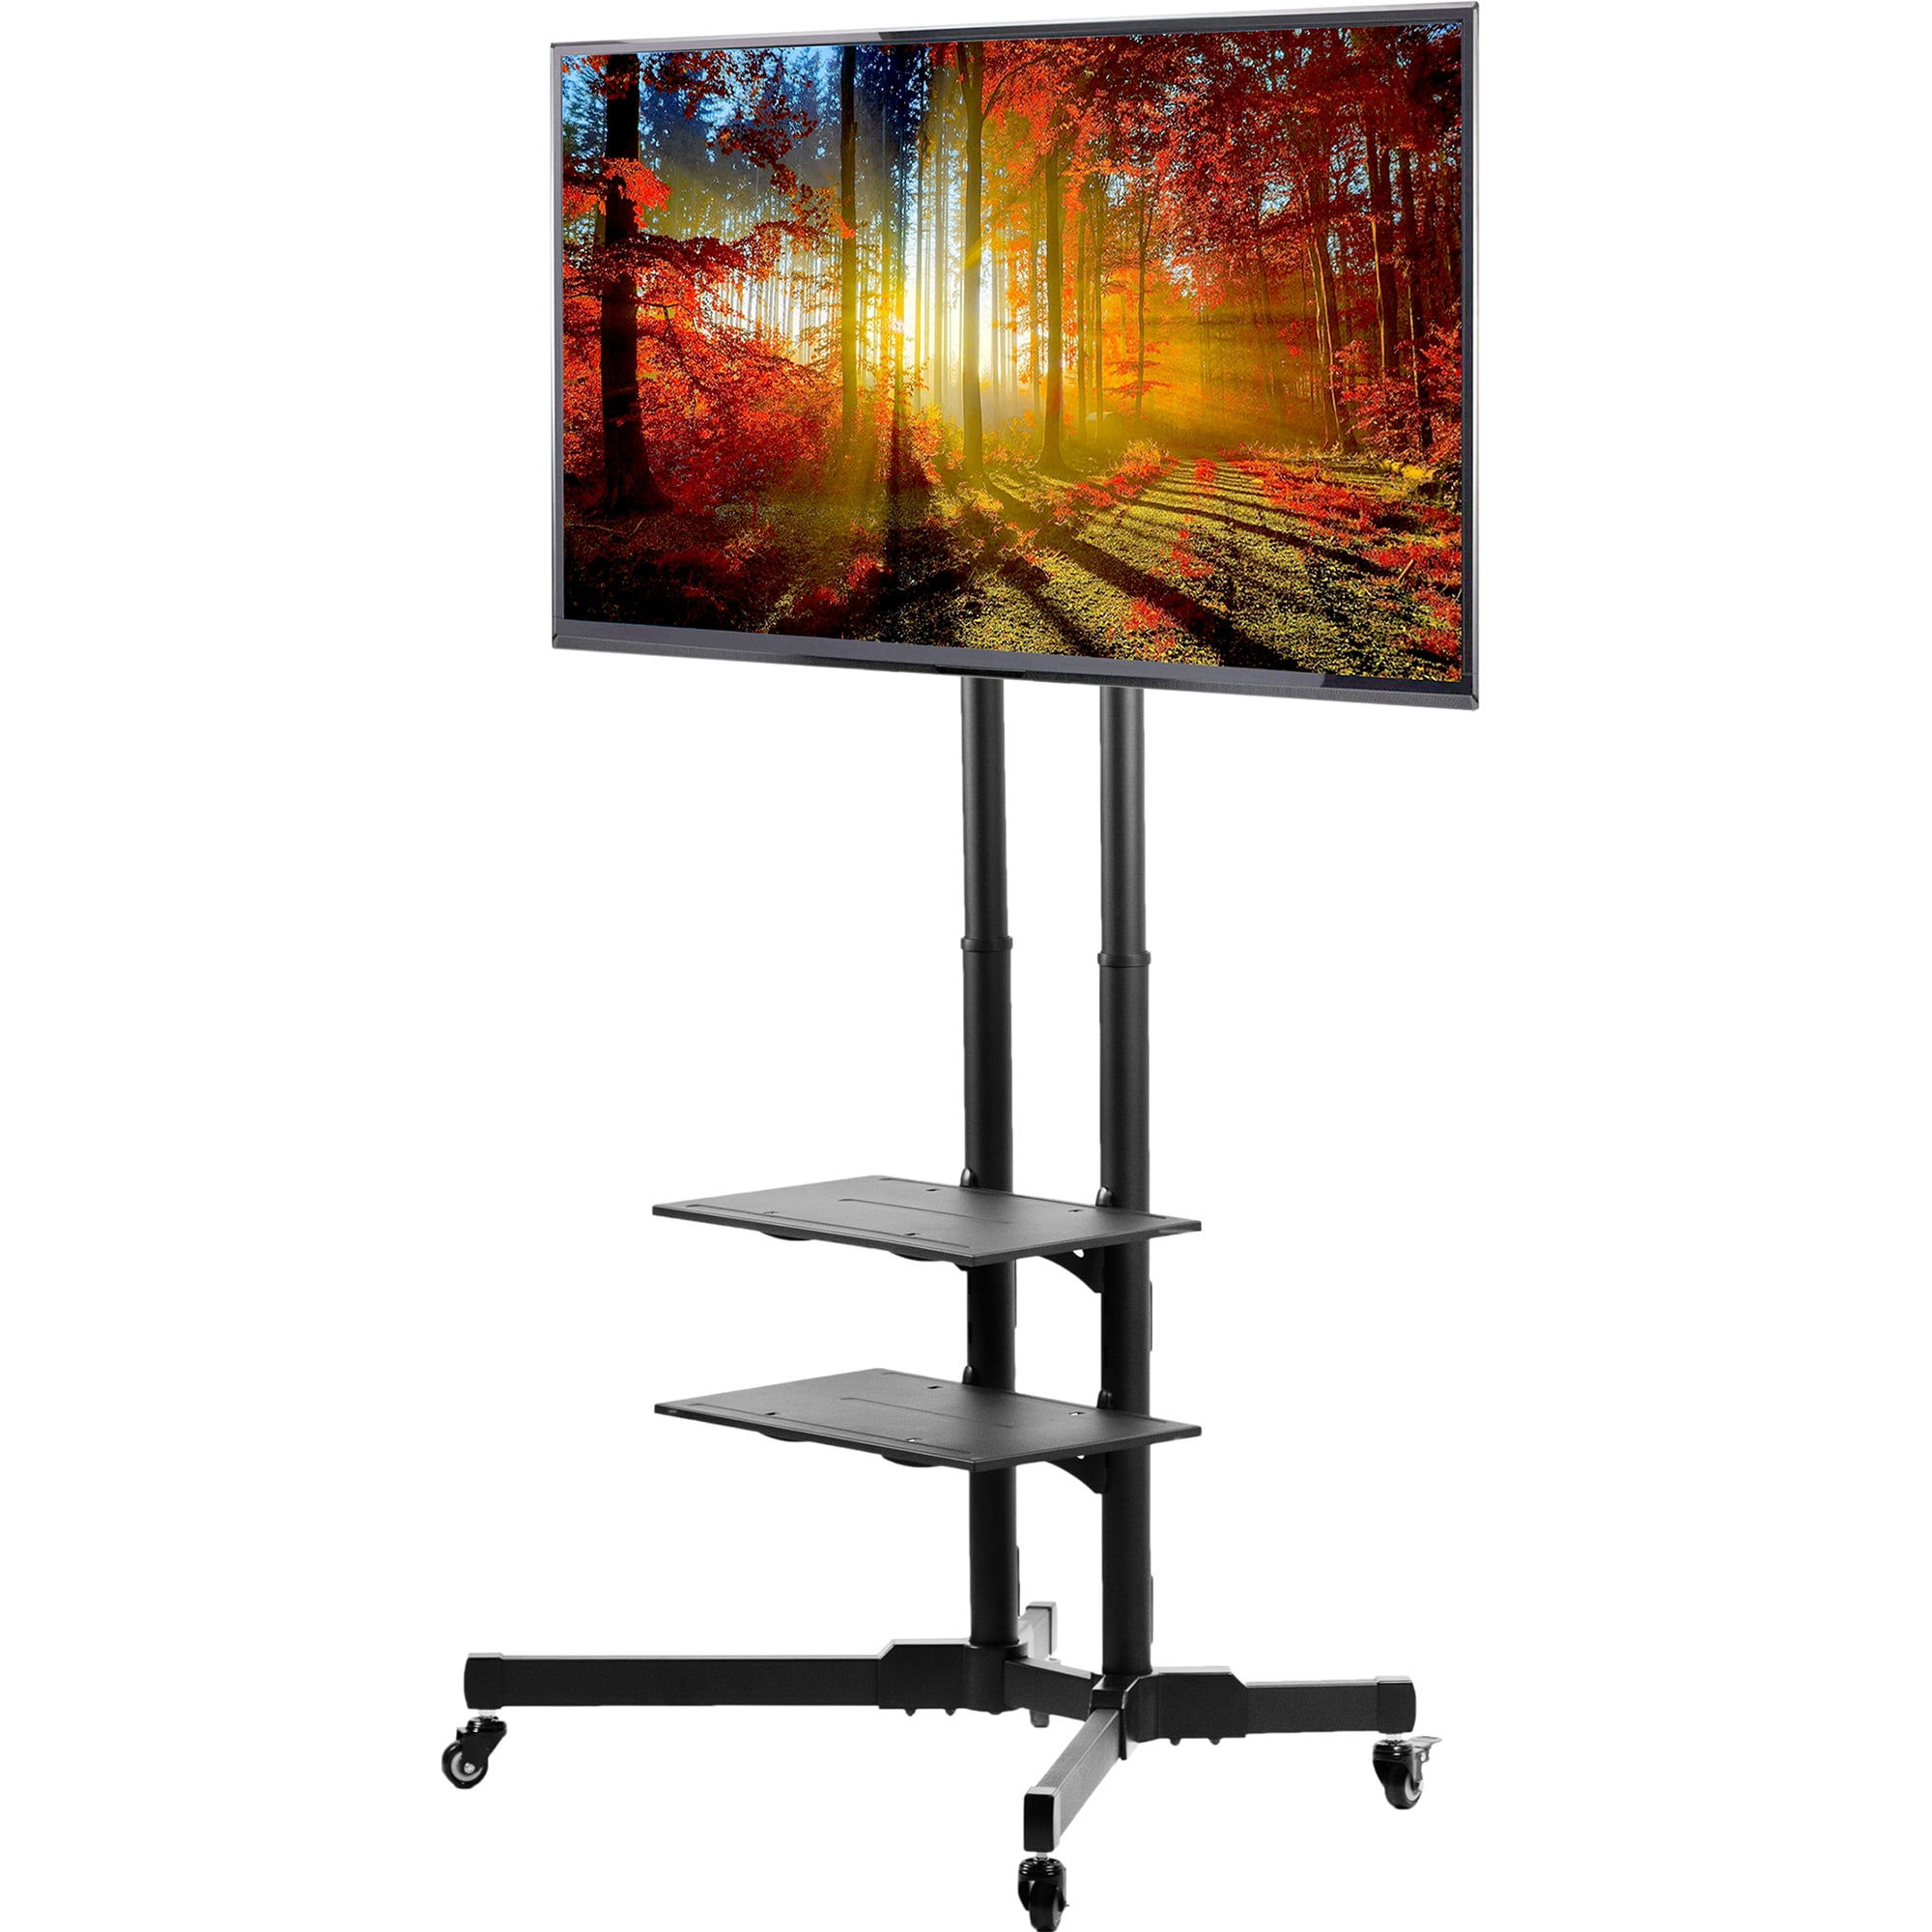 Details about   Mobile TV Cart Floor Stand Mount Height Adjustable Large Trolley for 32-80'' TV 